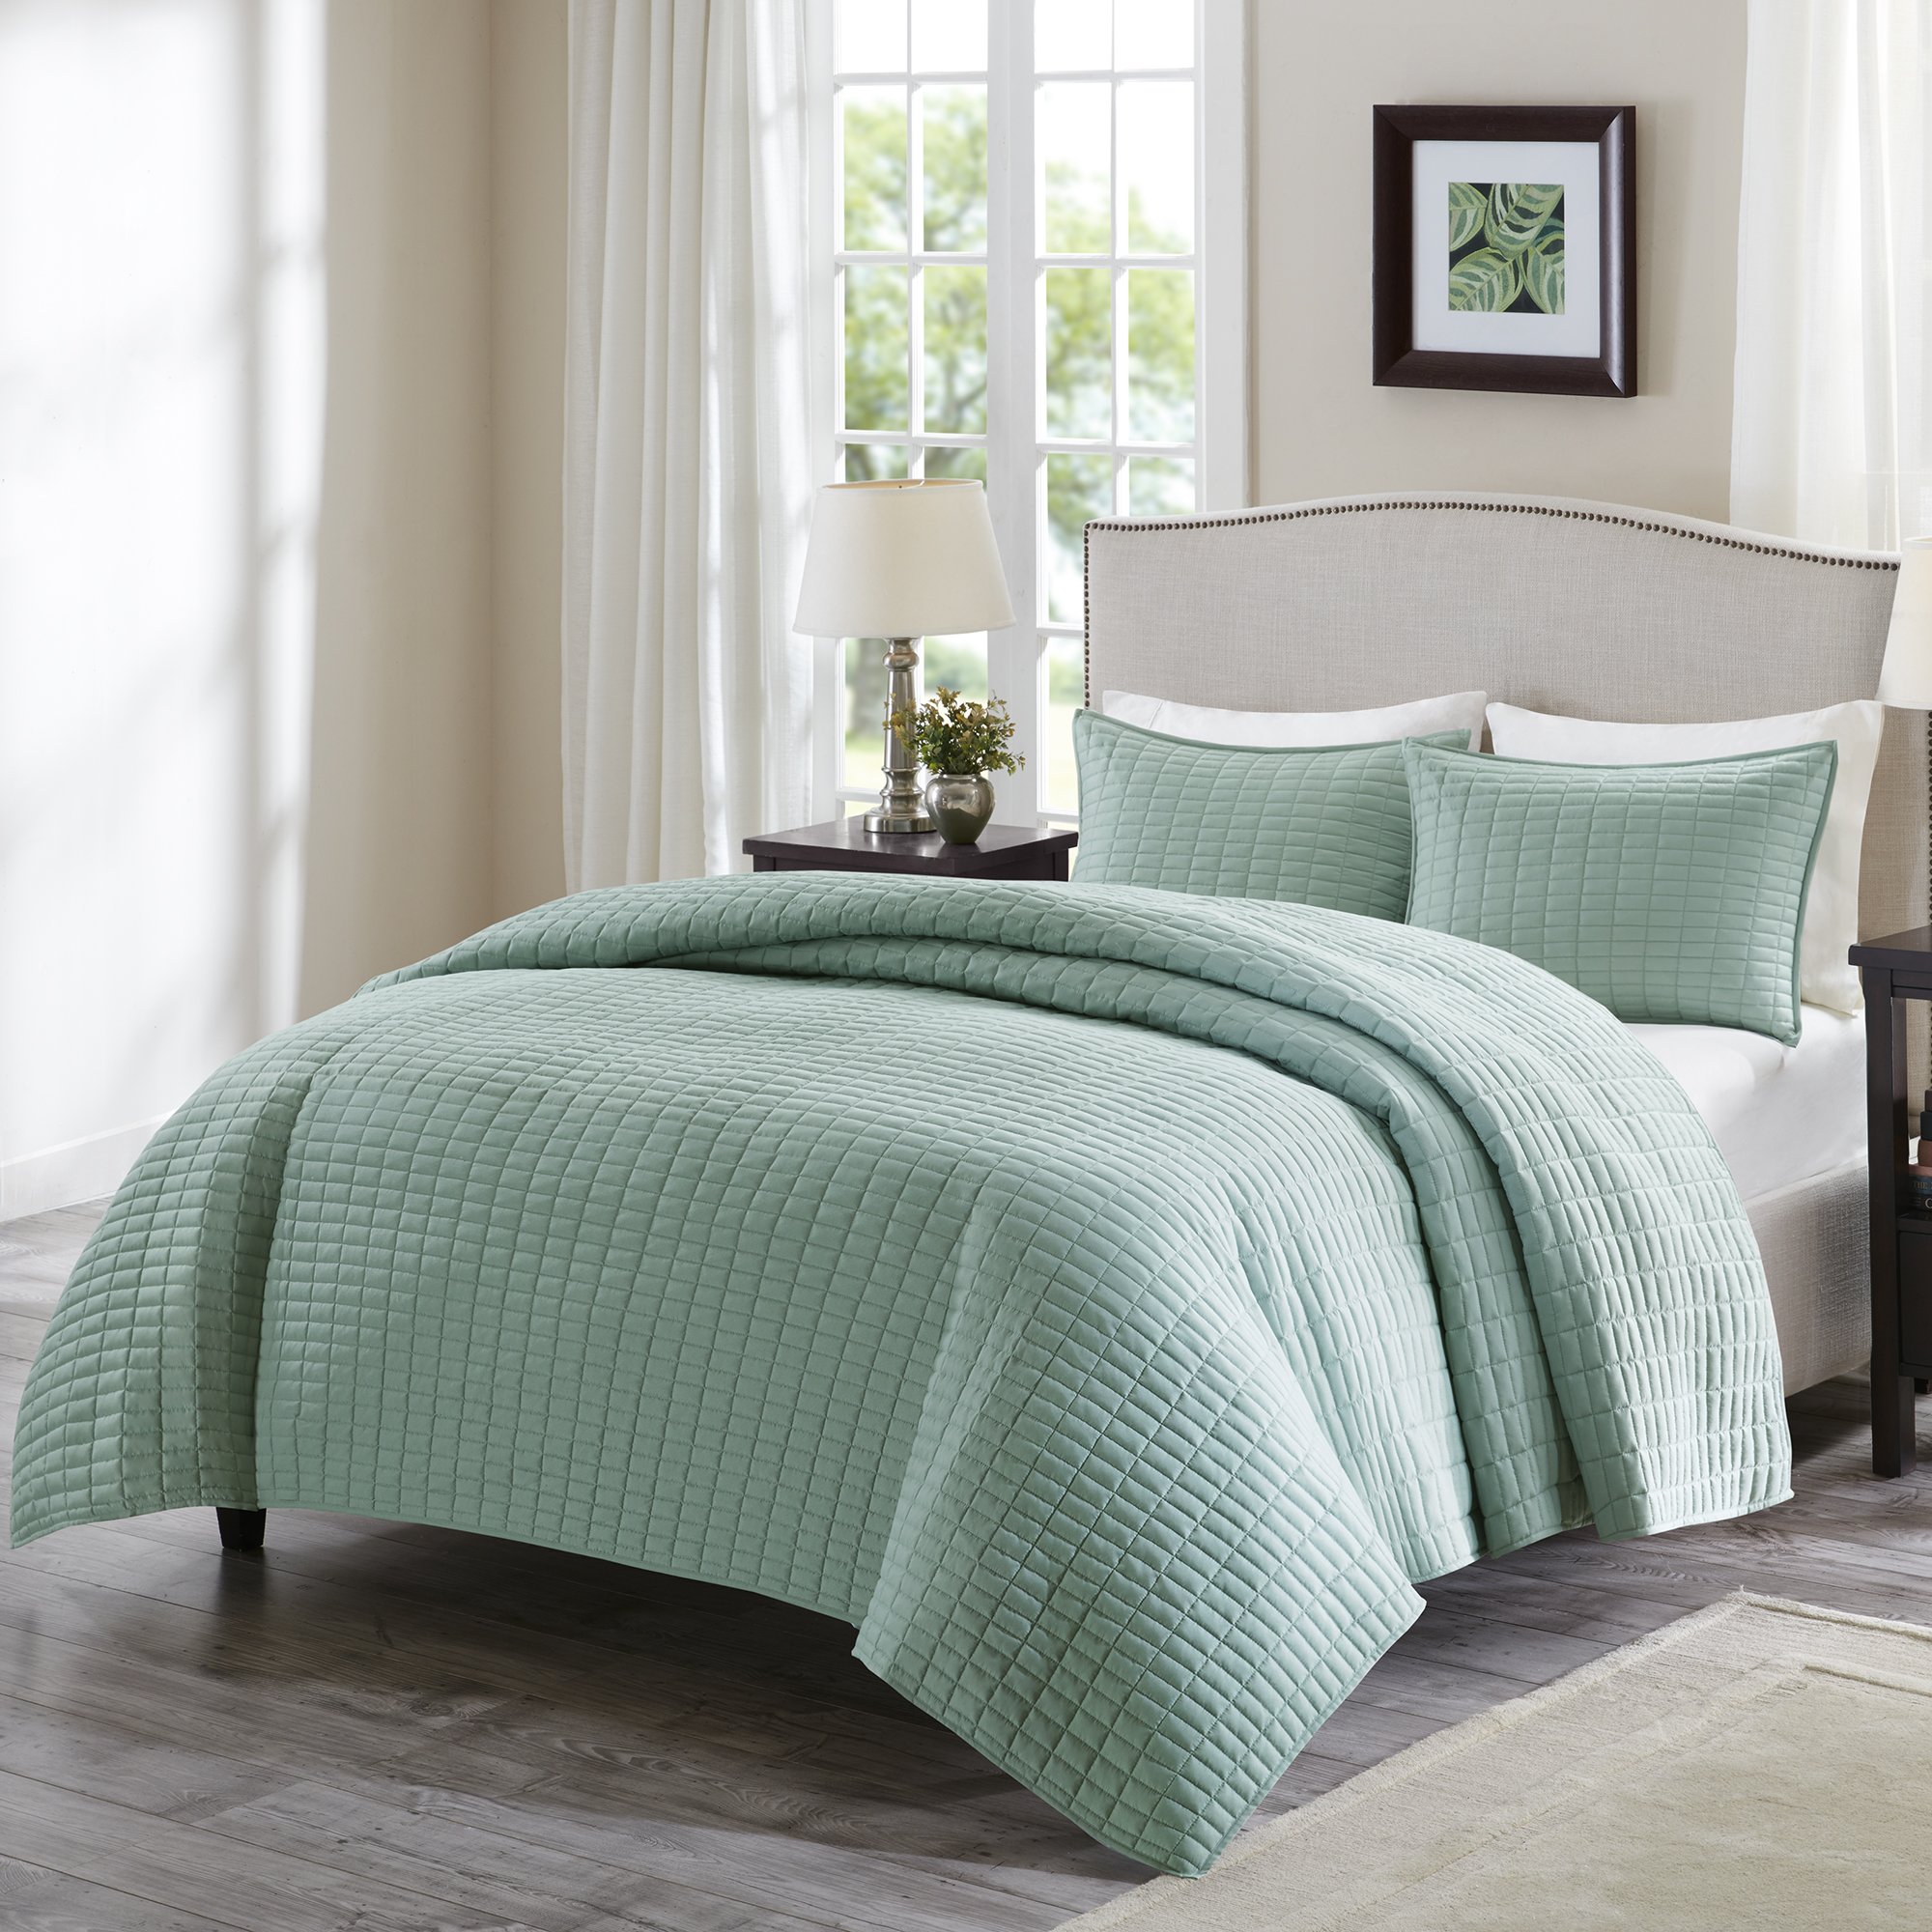 Book Cover Comfort Spaces Kienna Quilt Set-Luxury Double Sided Stitching Design Summer Blanket, Lightweight, Soft, All Season Bedding Layer, Matching Sham, Seafoam, Coverlet Full/Queen(90